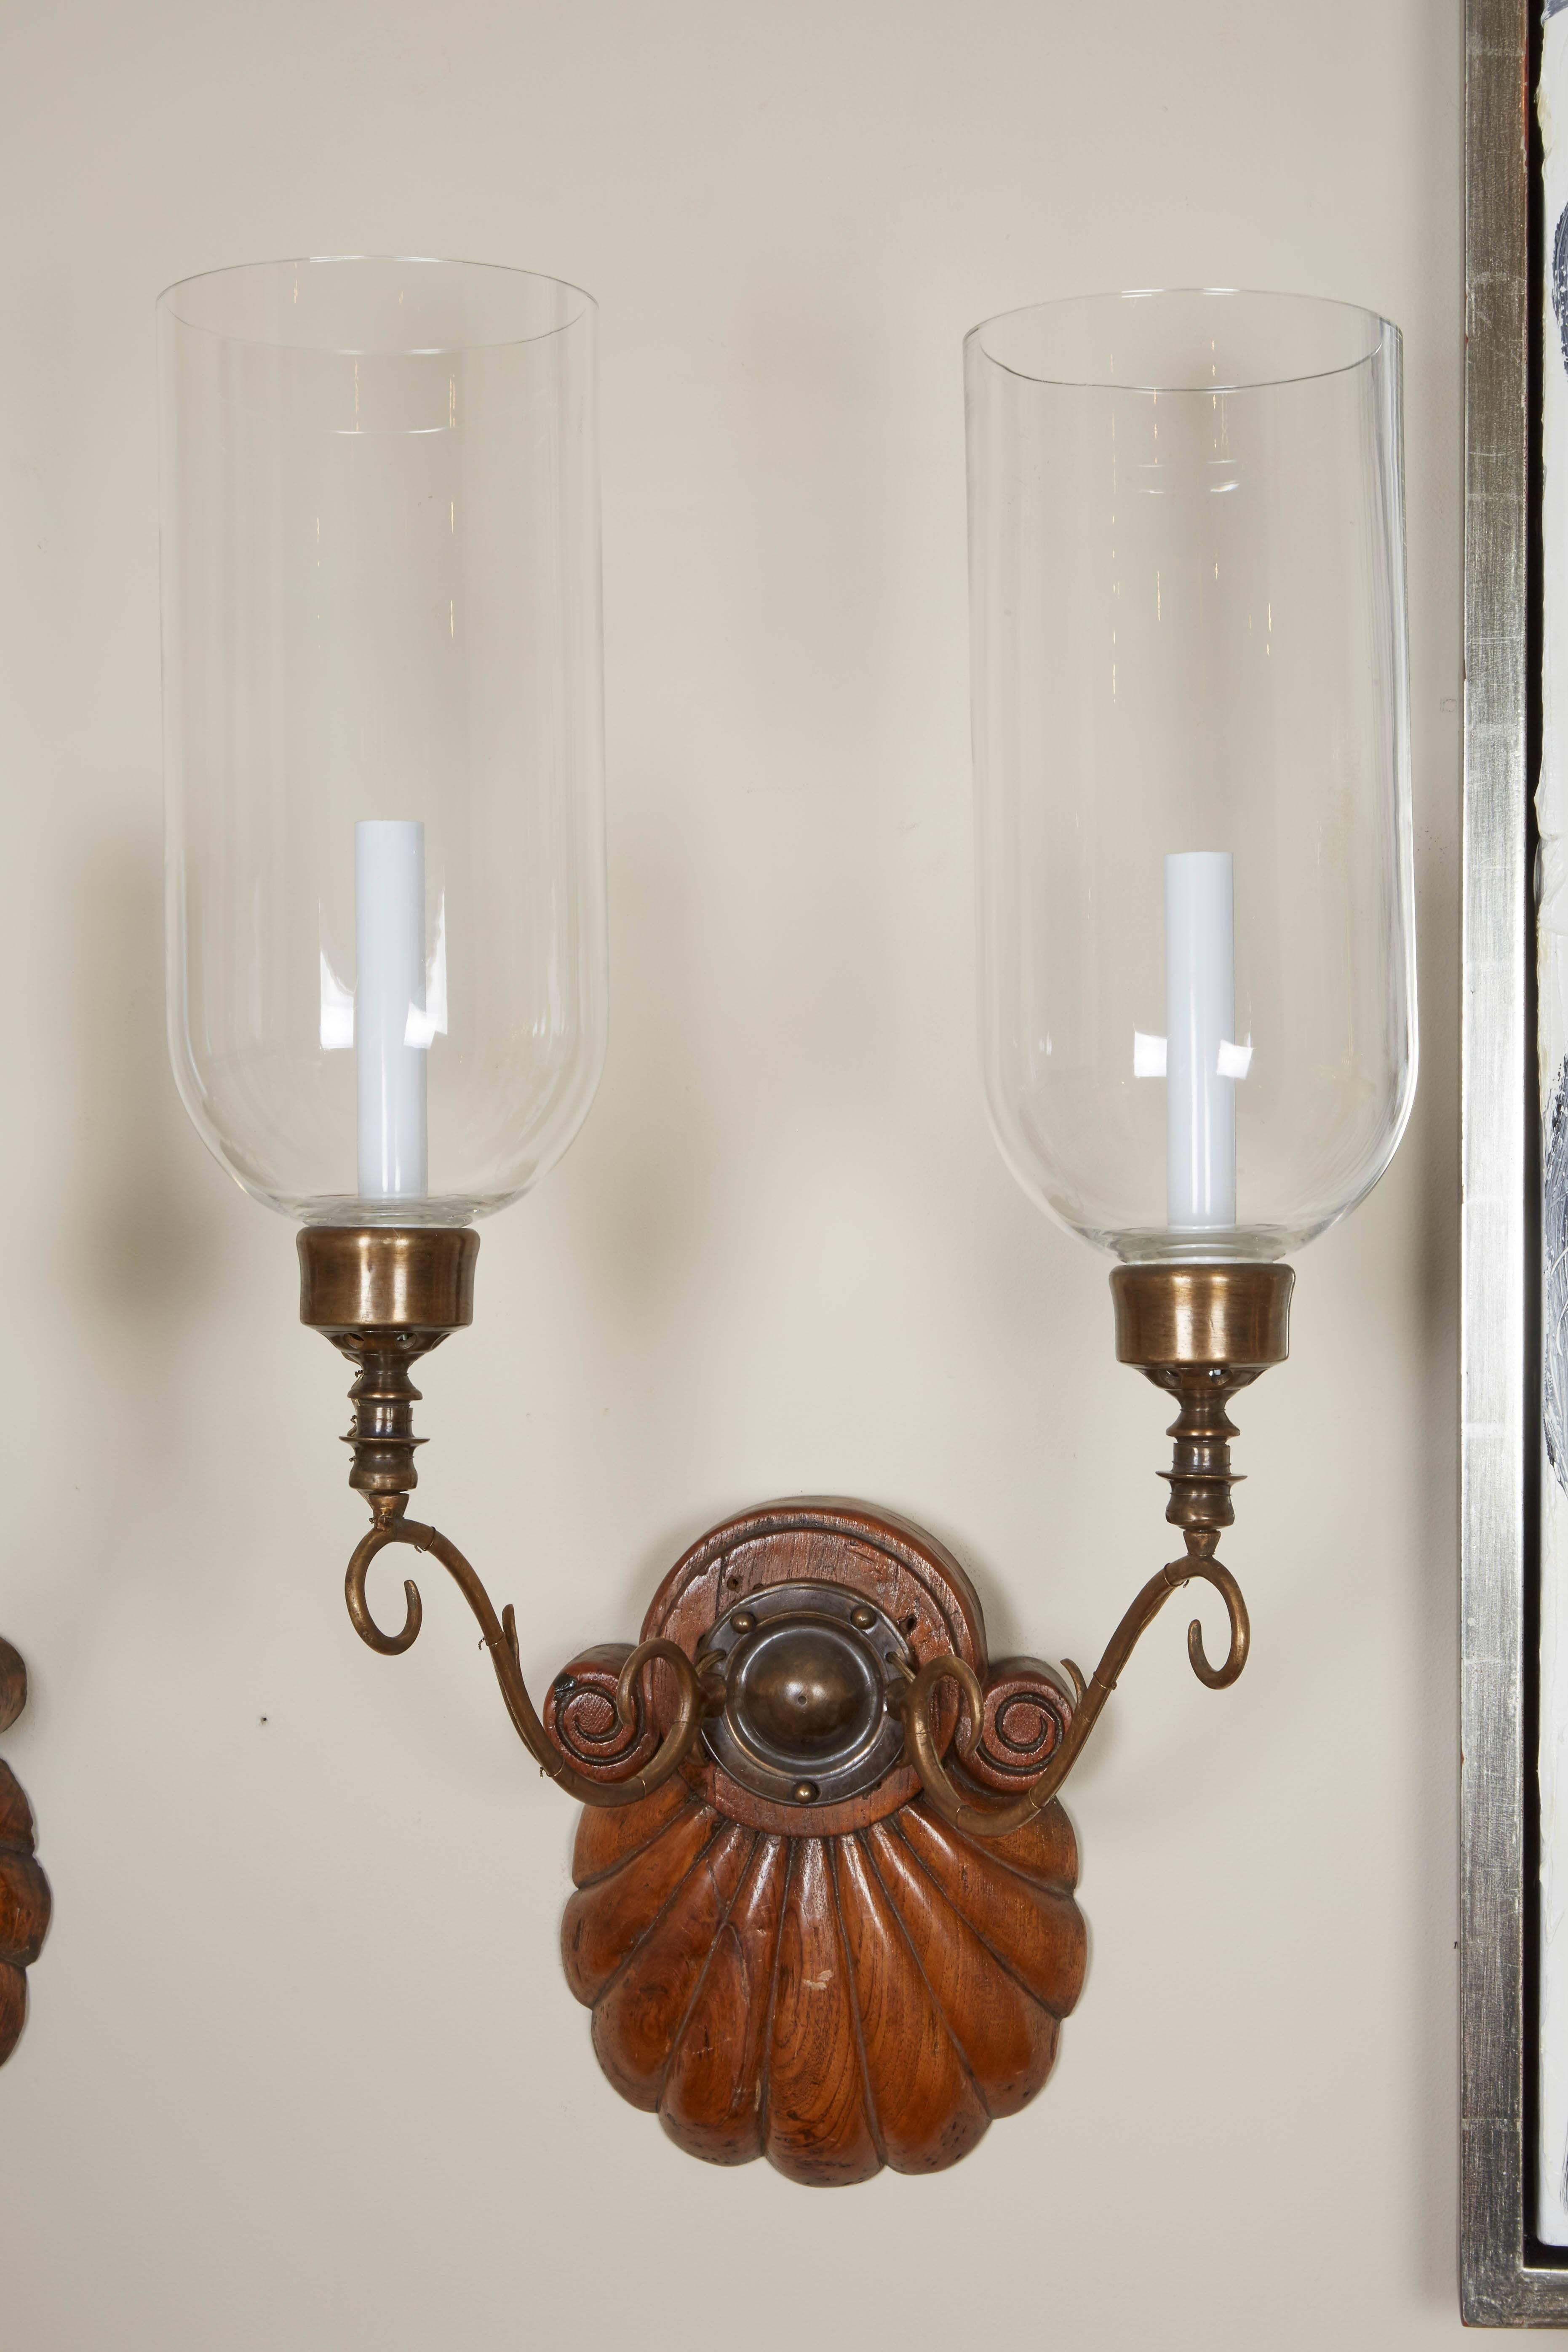 A pair of Anglo-Indian two-light sconces, hardwood shell form backplate issuing bronze out-scrolled candle-arms supporting a single Edison socket with hurricane shade, circa 1890.
Provenance: These sconces were purchased by Albert Nestle in India,